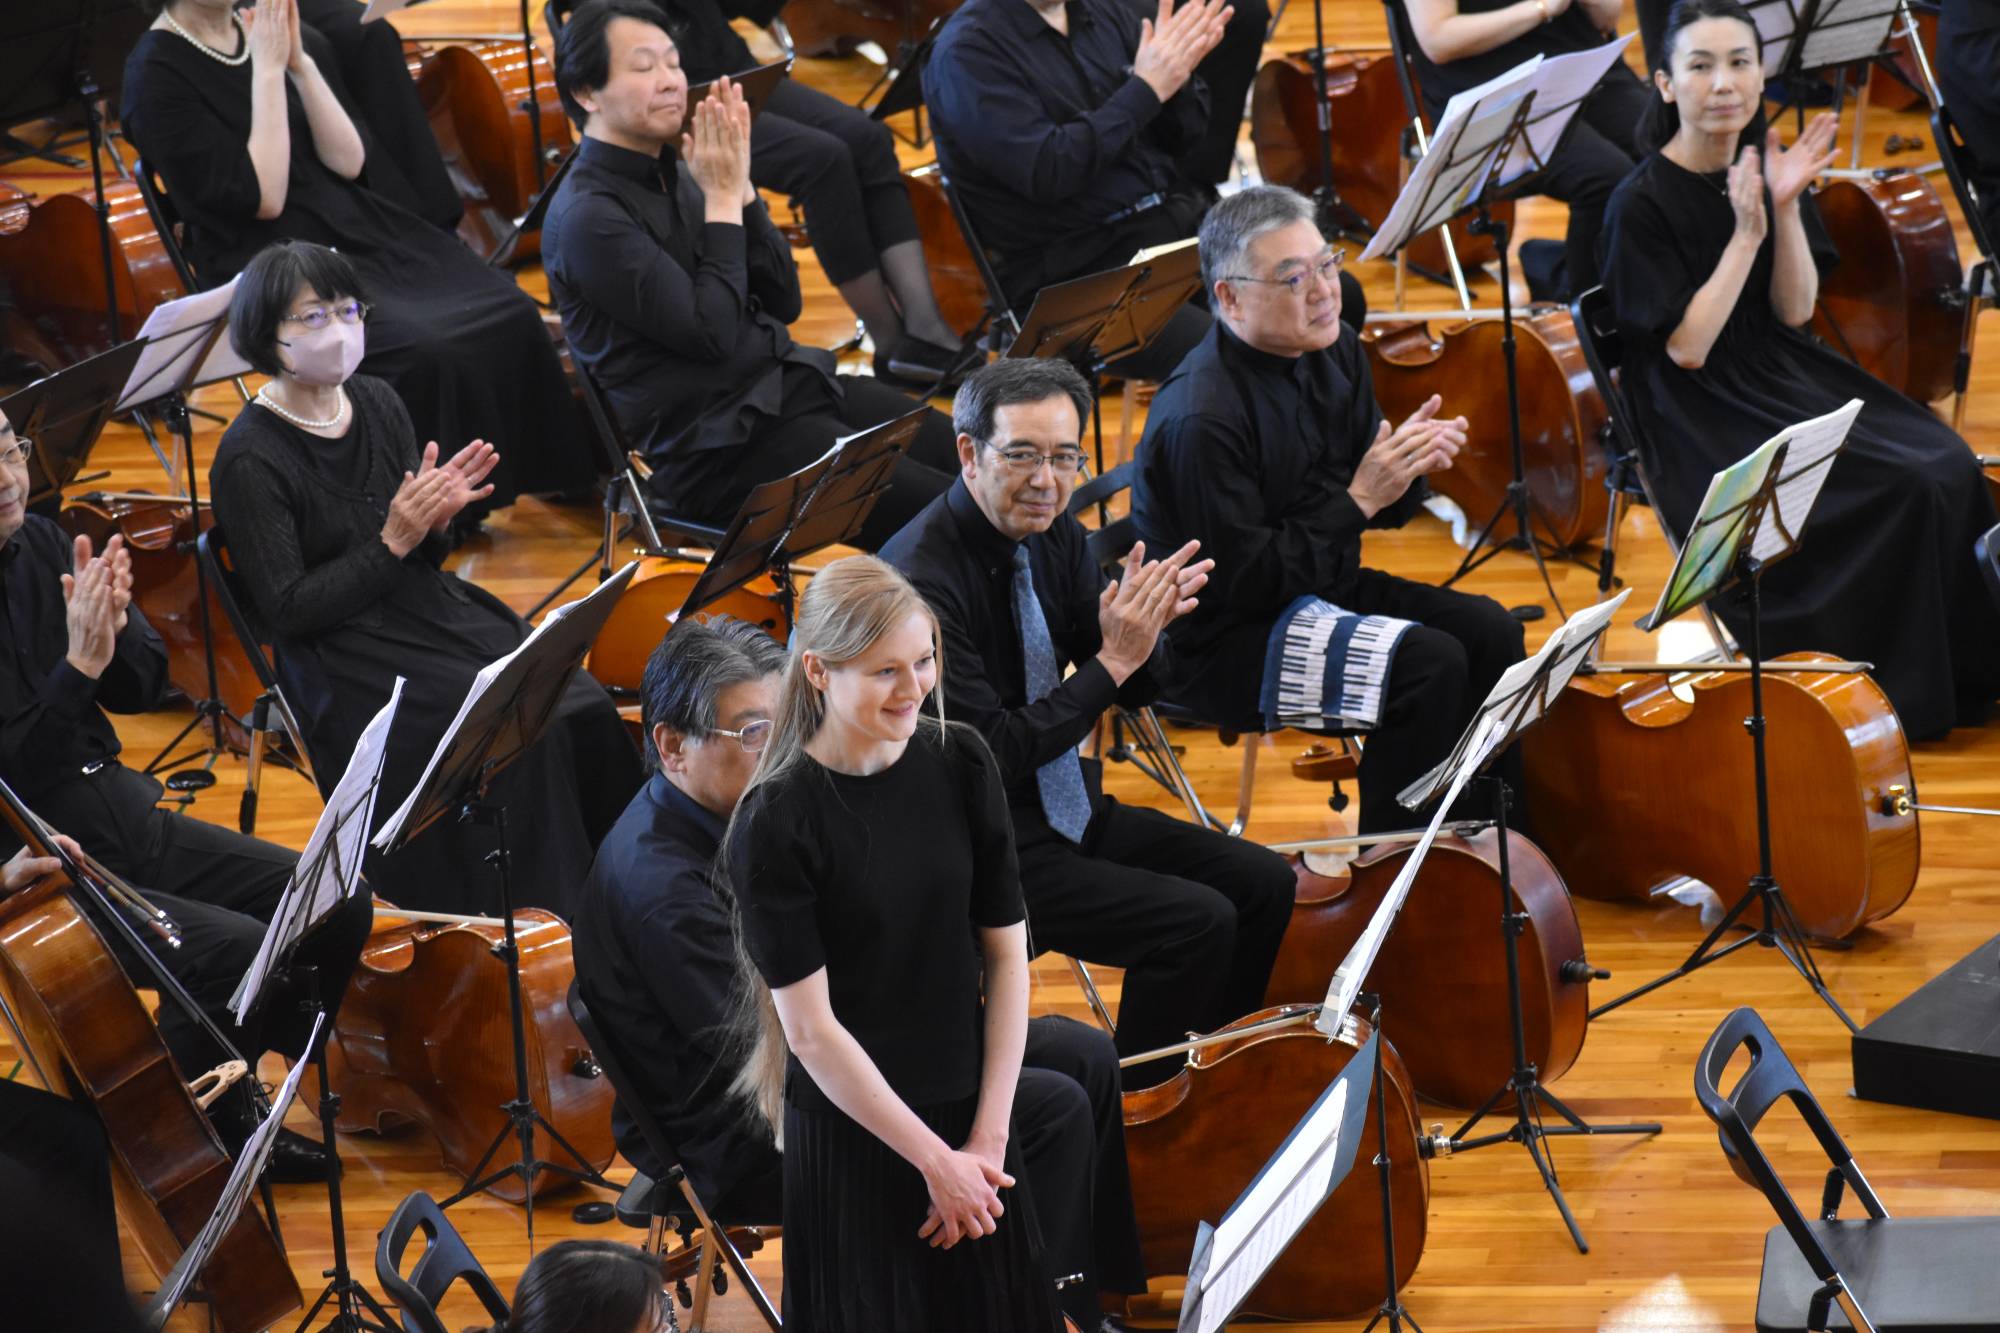 Ukrainian cellist Iana Lavrova stands up when introduced during a concert in Fukushima Prefecture on May 21. Lavrova headed to Japan in March 2022, shortly after Russia's invasion of Ukraine began that February. | KYODO